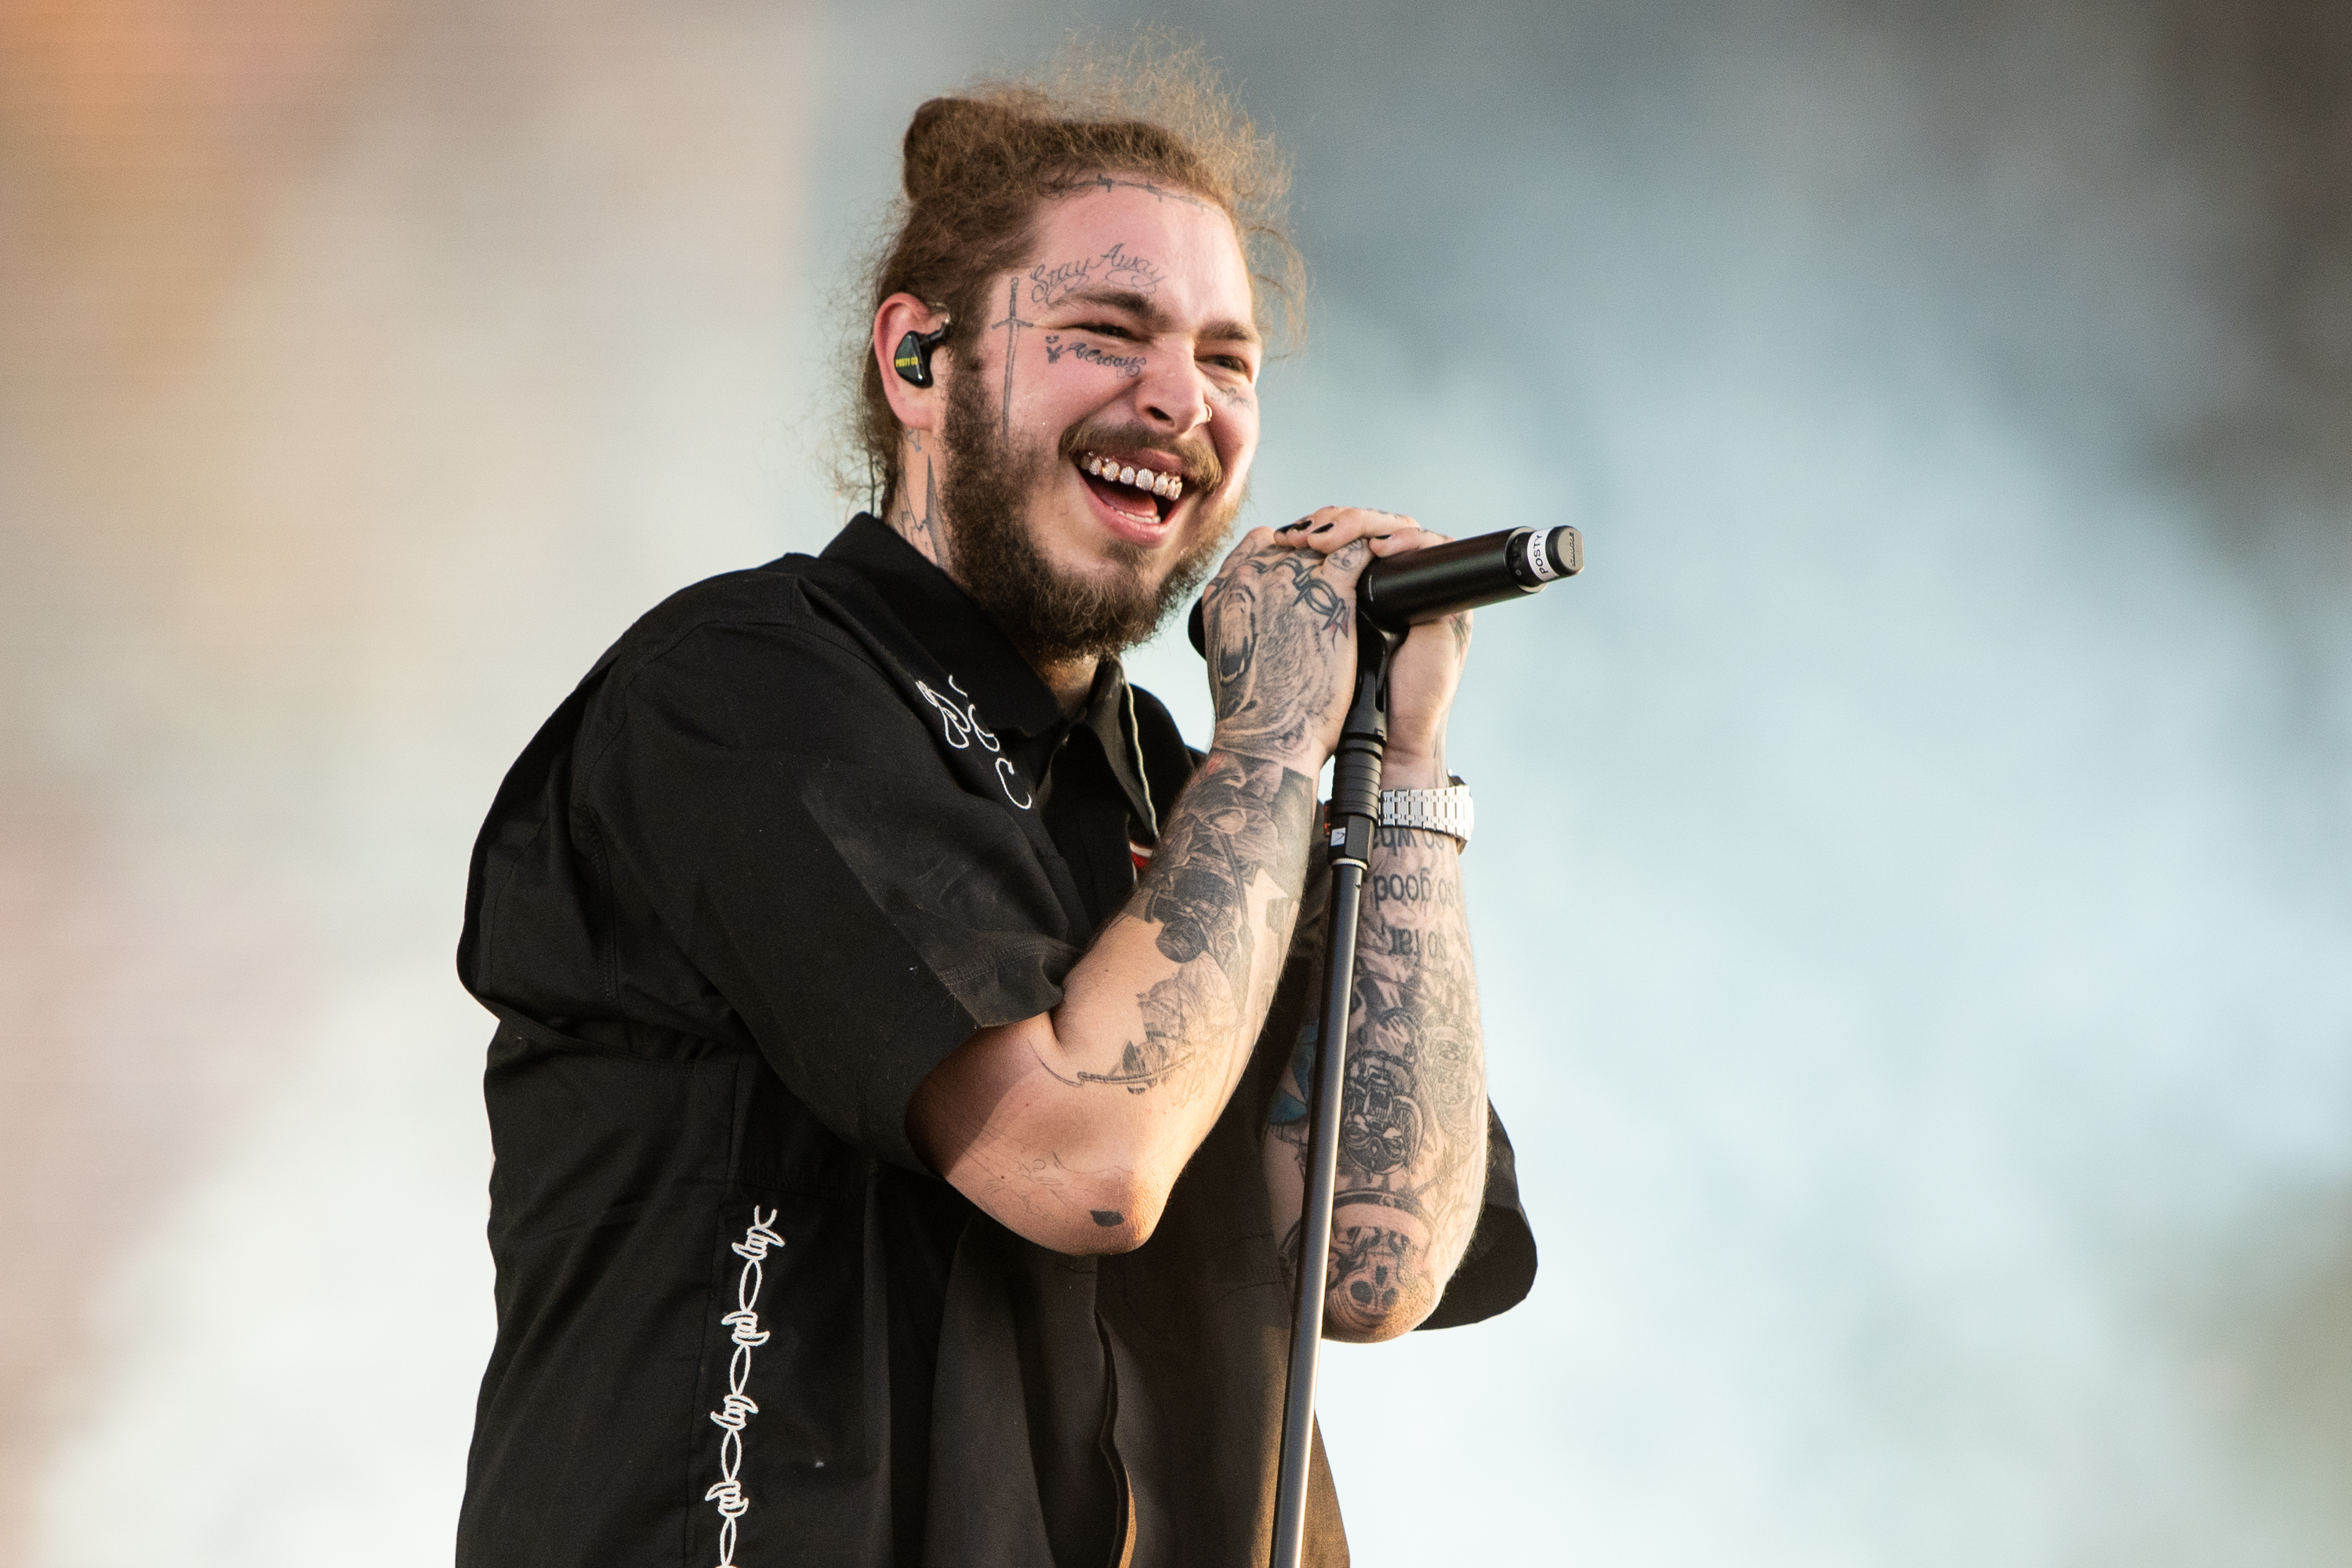 Post Malone performs during Wireless Festival 2018